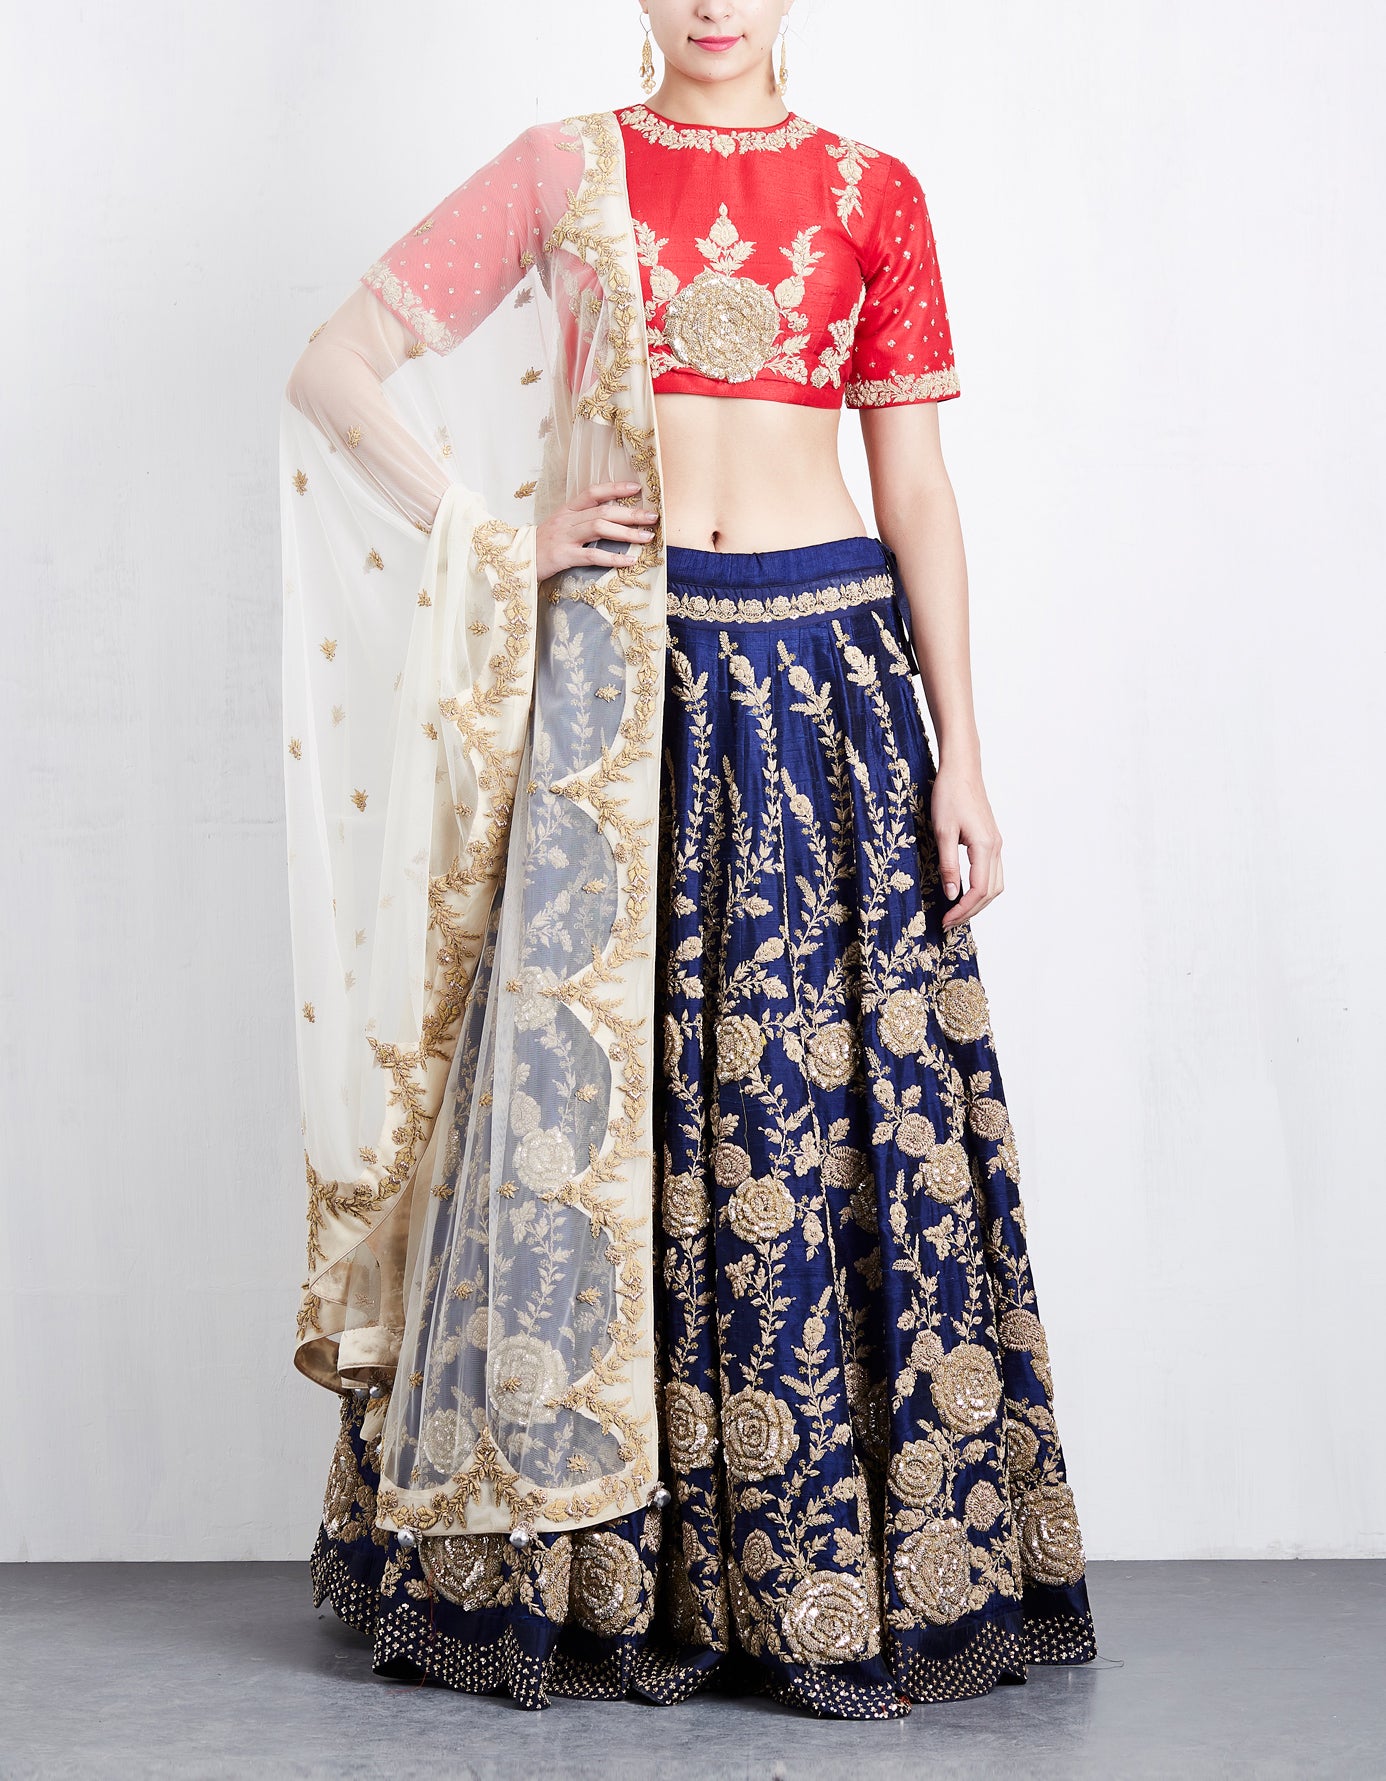 Powder blue lehenga skirt with Navy blue embroidered blouse